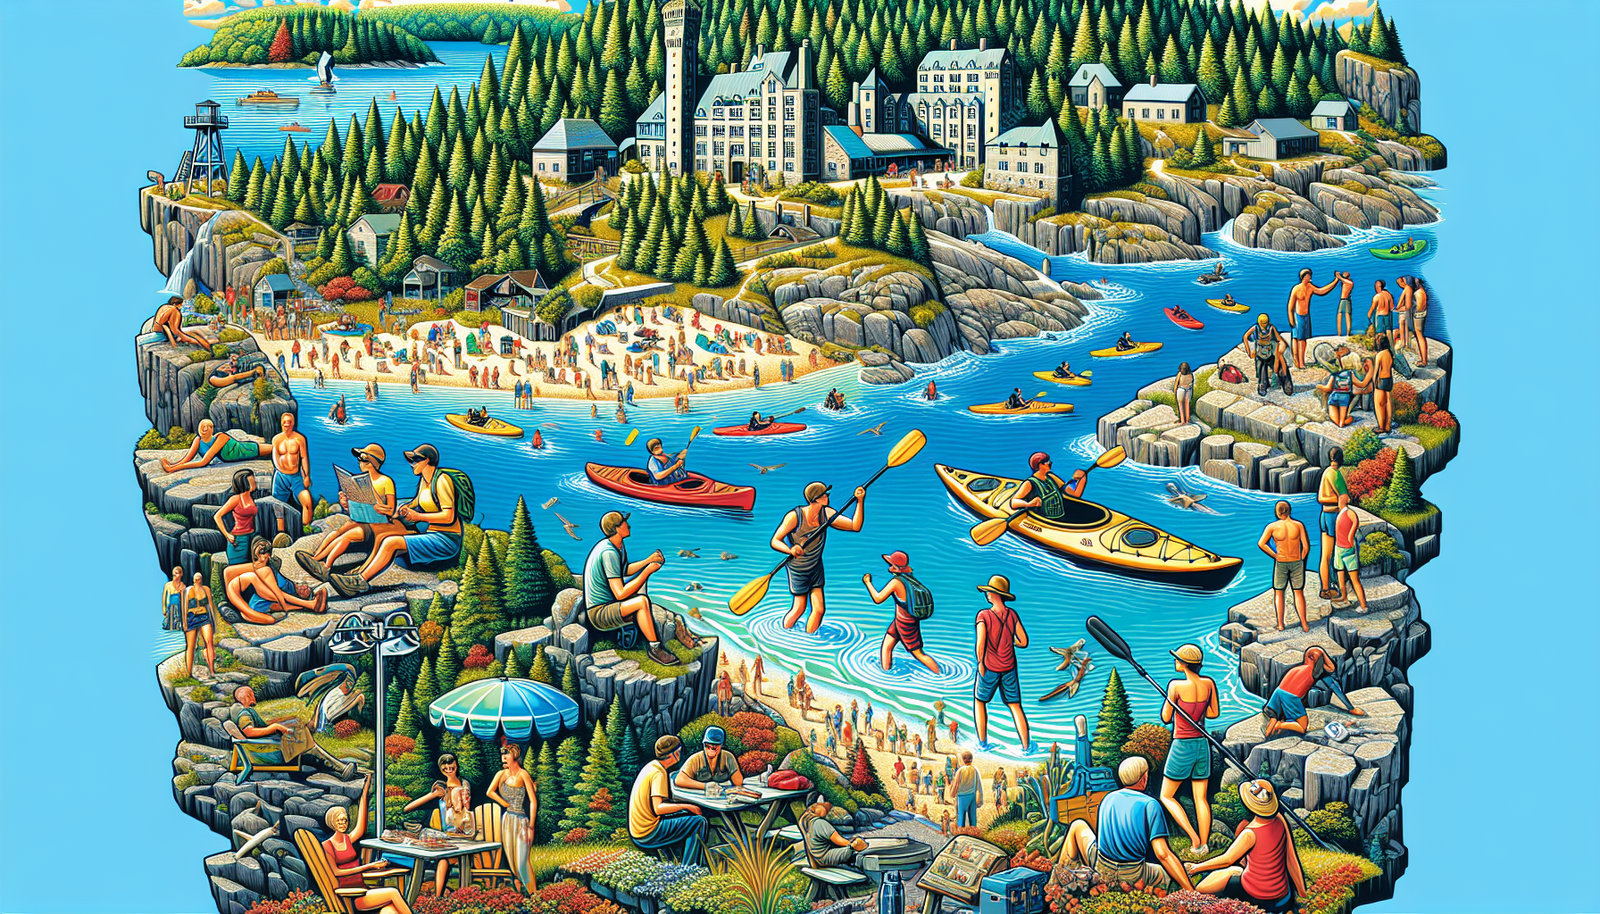 Illustration of Texada Island's tourist attractions and activities with diverse visitors enjoying the scenery